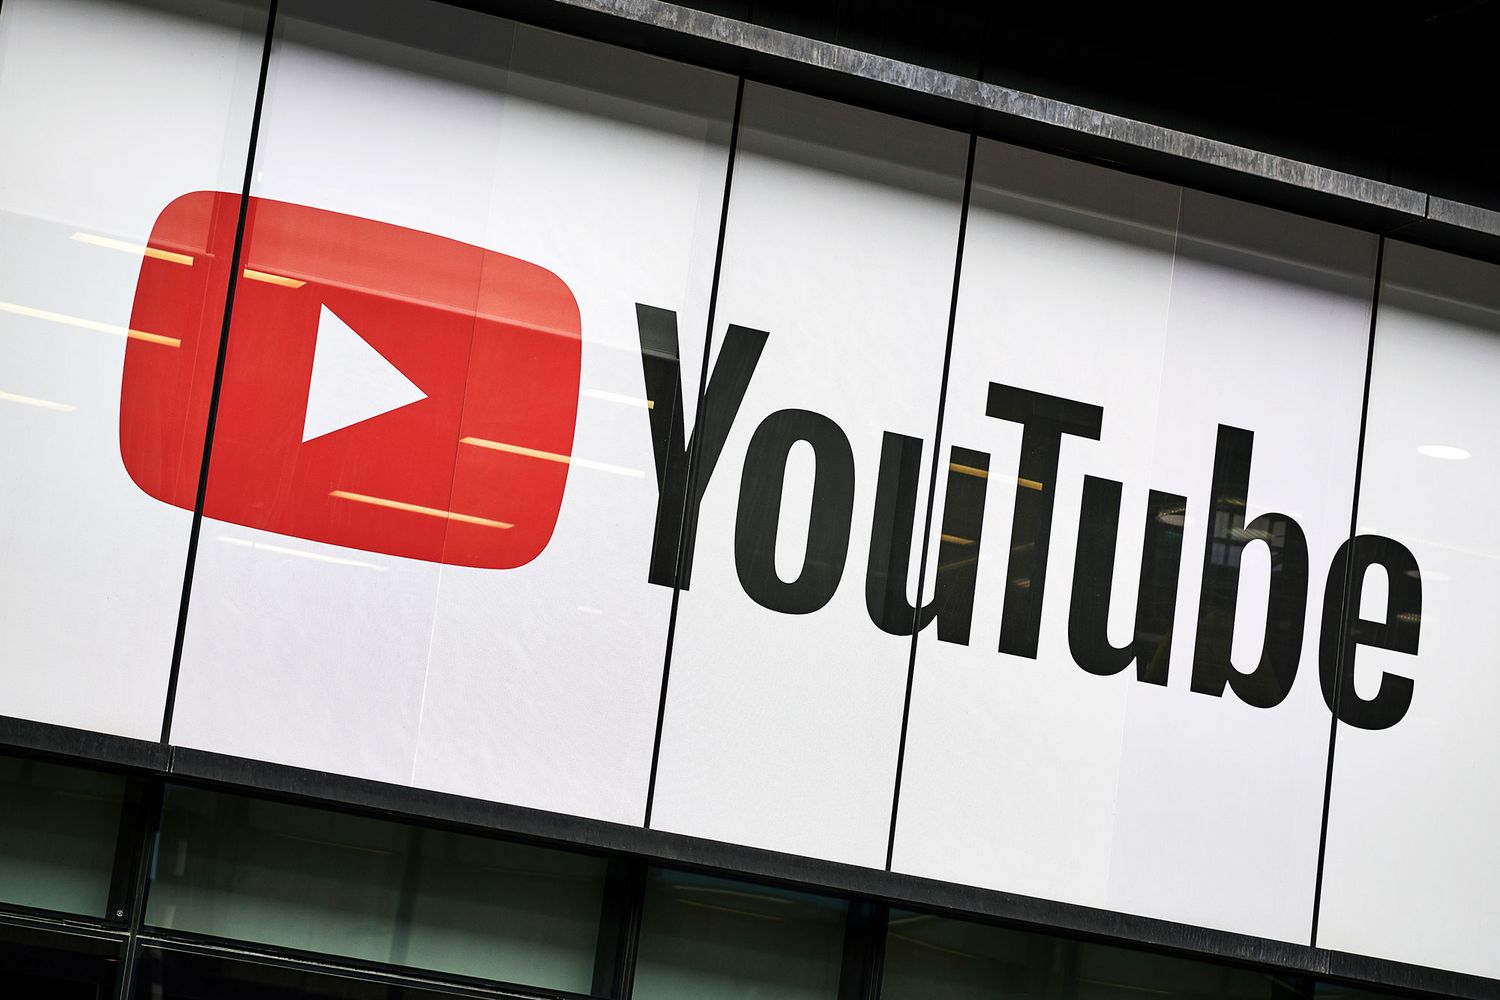 Detail of the YouTube logo outside the YouTube Space studios in London, taken on June 4, 2019. (Photo by Olly Curtis/Future via Getty Images)